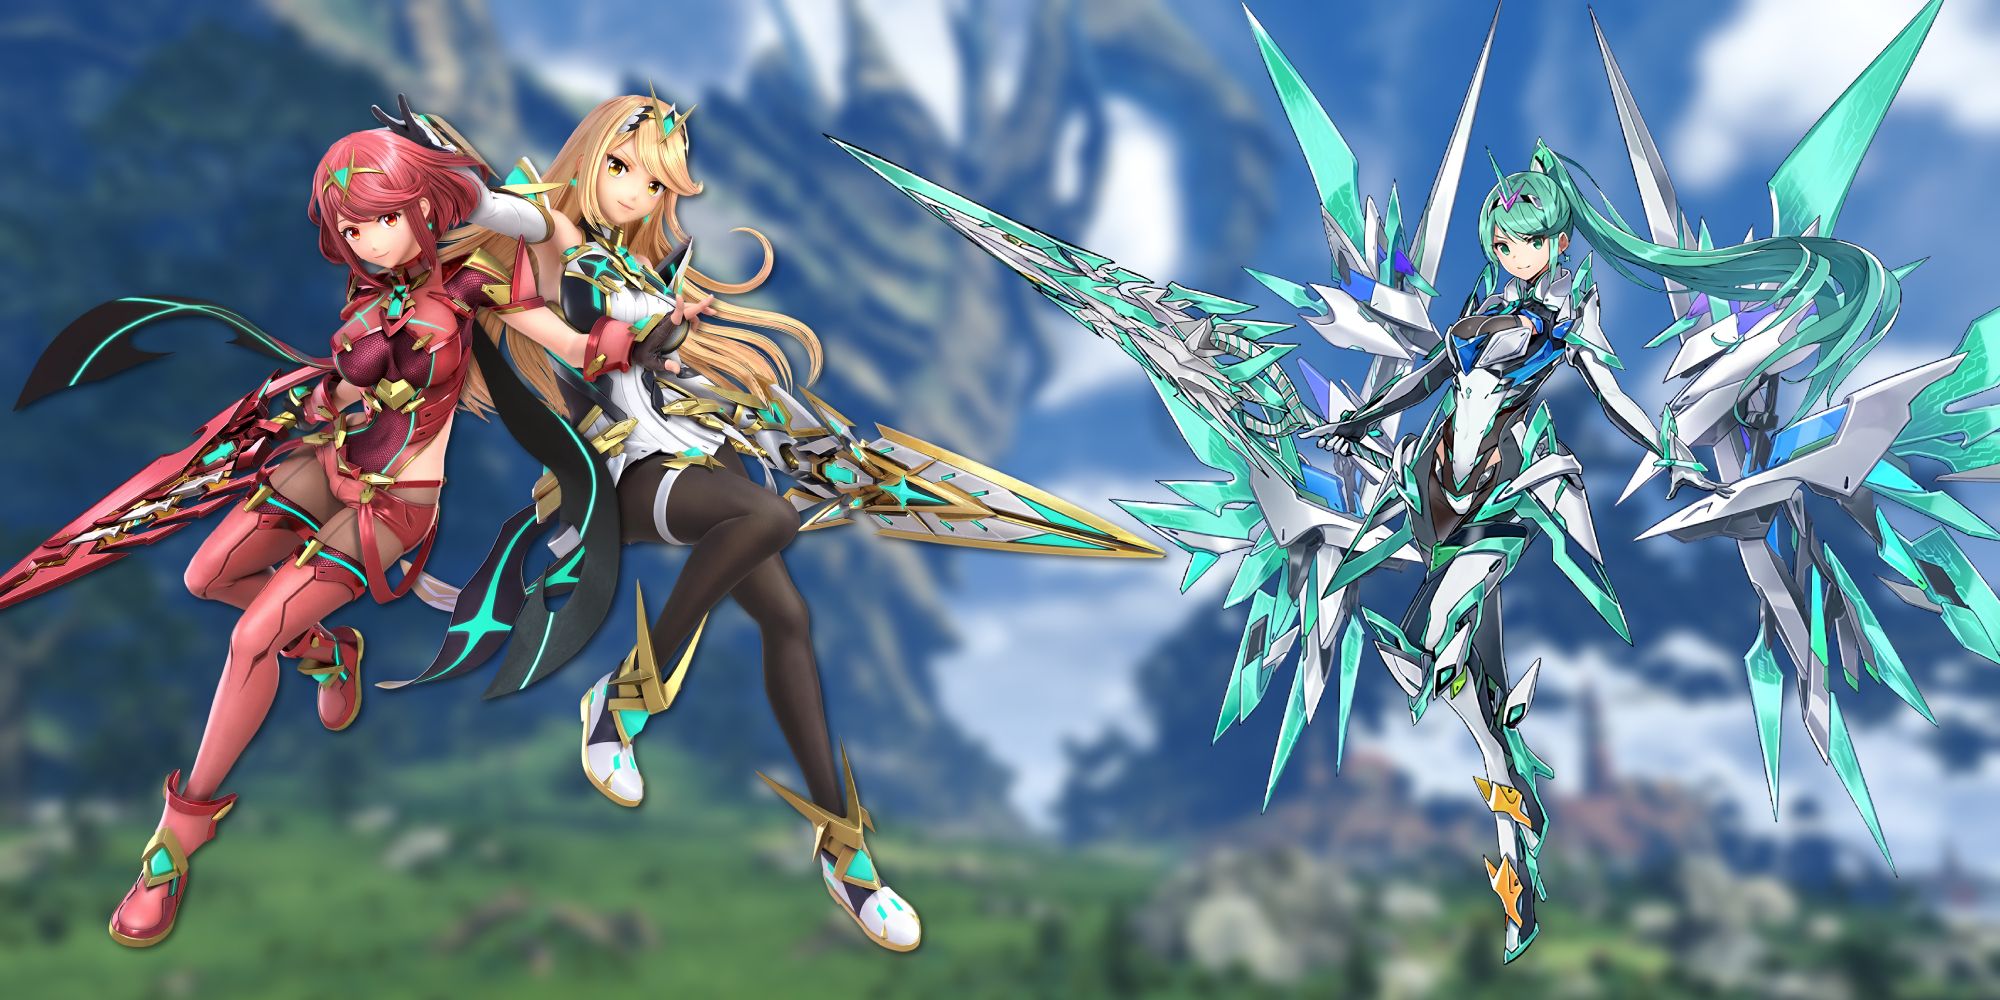 an image of Pyra, Mythra and Pneuma overlaid on top of a blurry image of Gormott from Xenoblade Chronicles 2